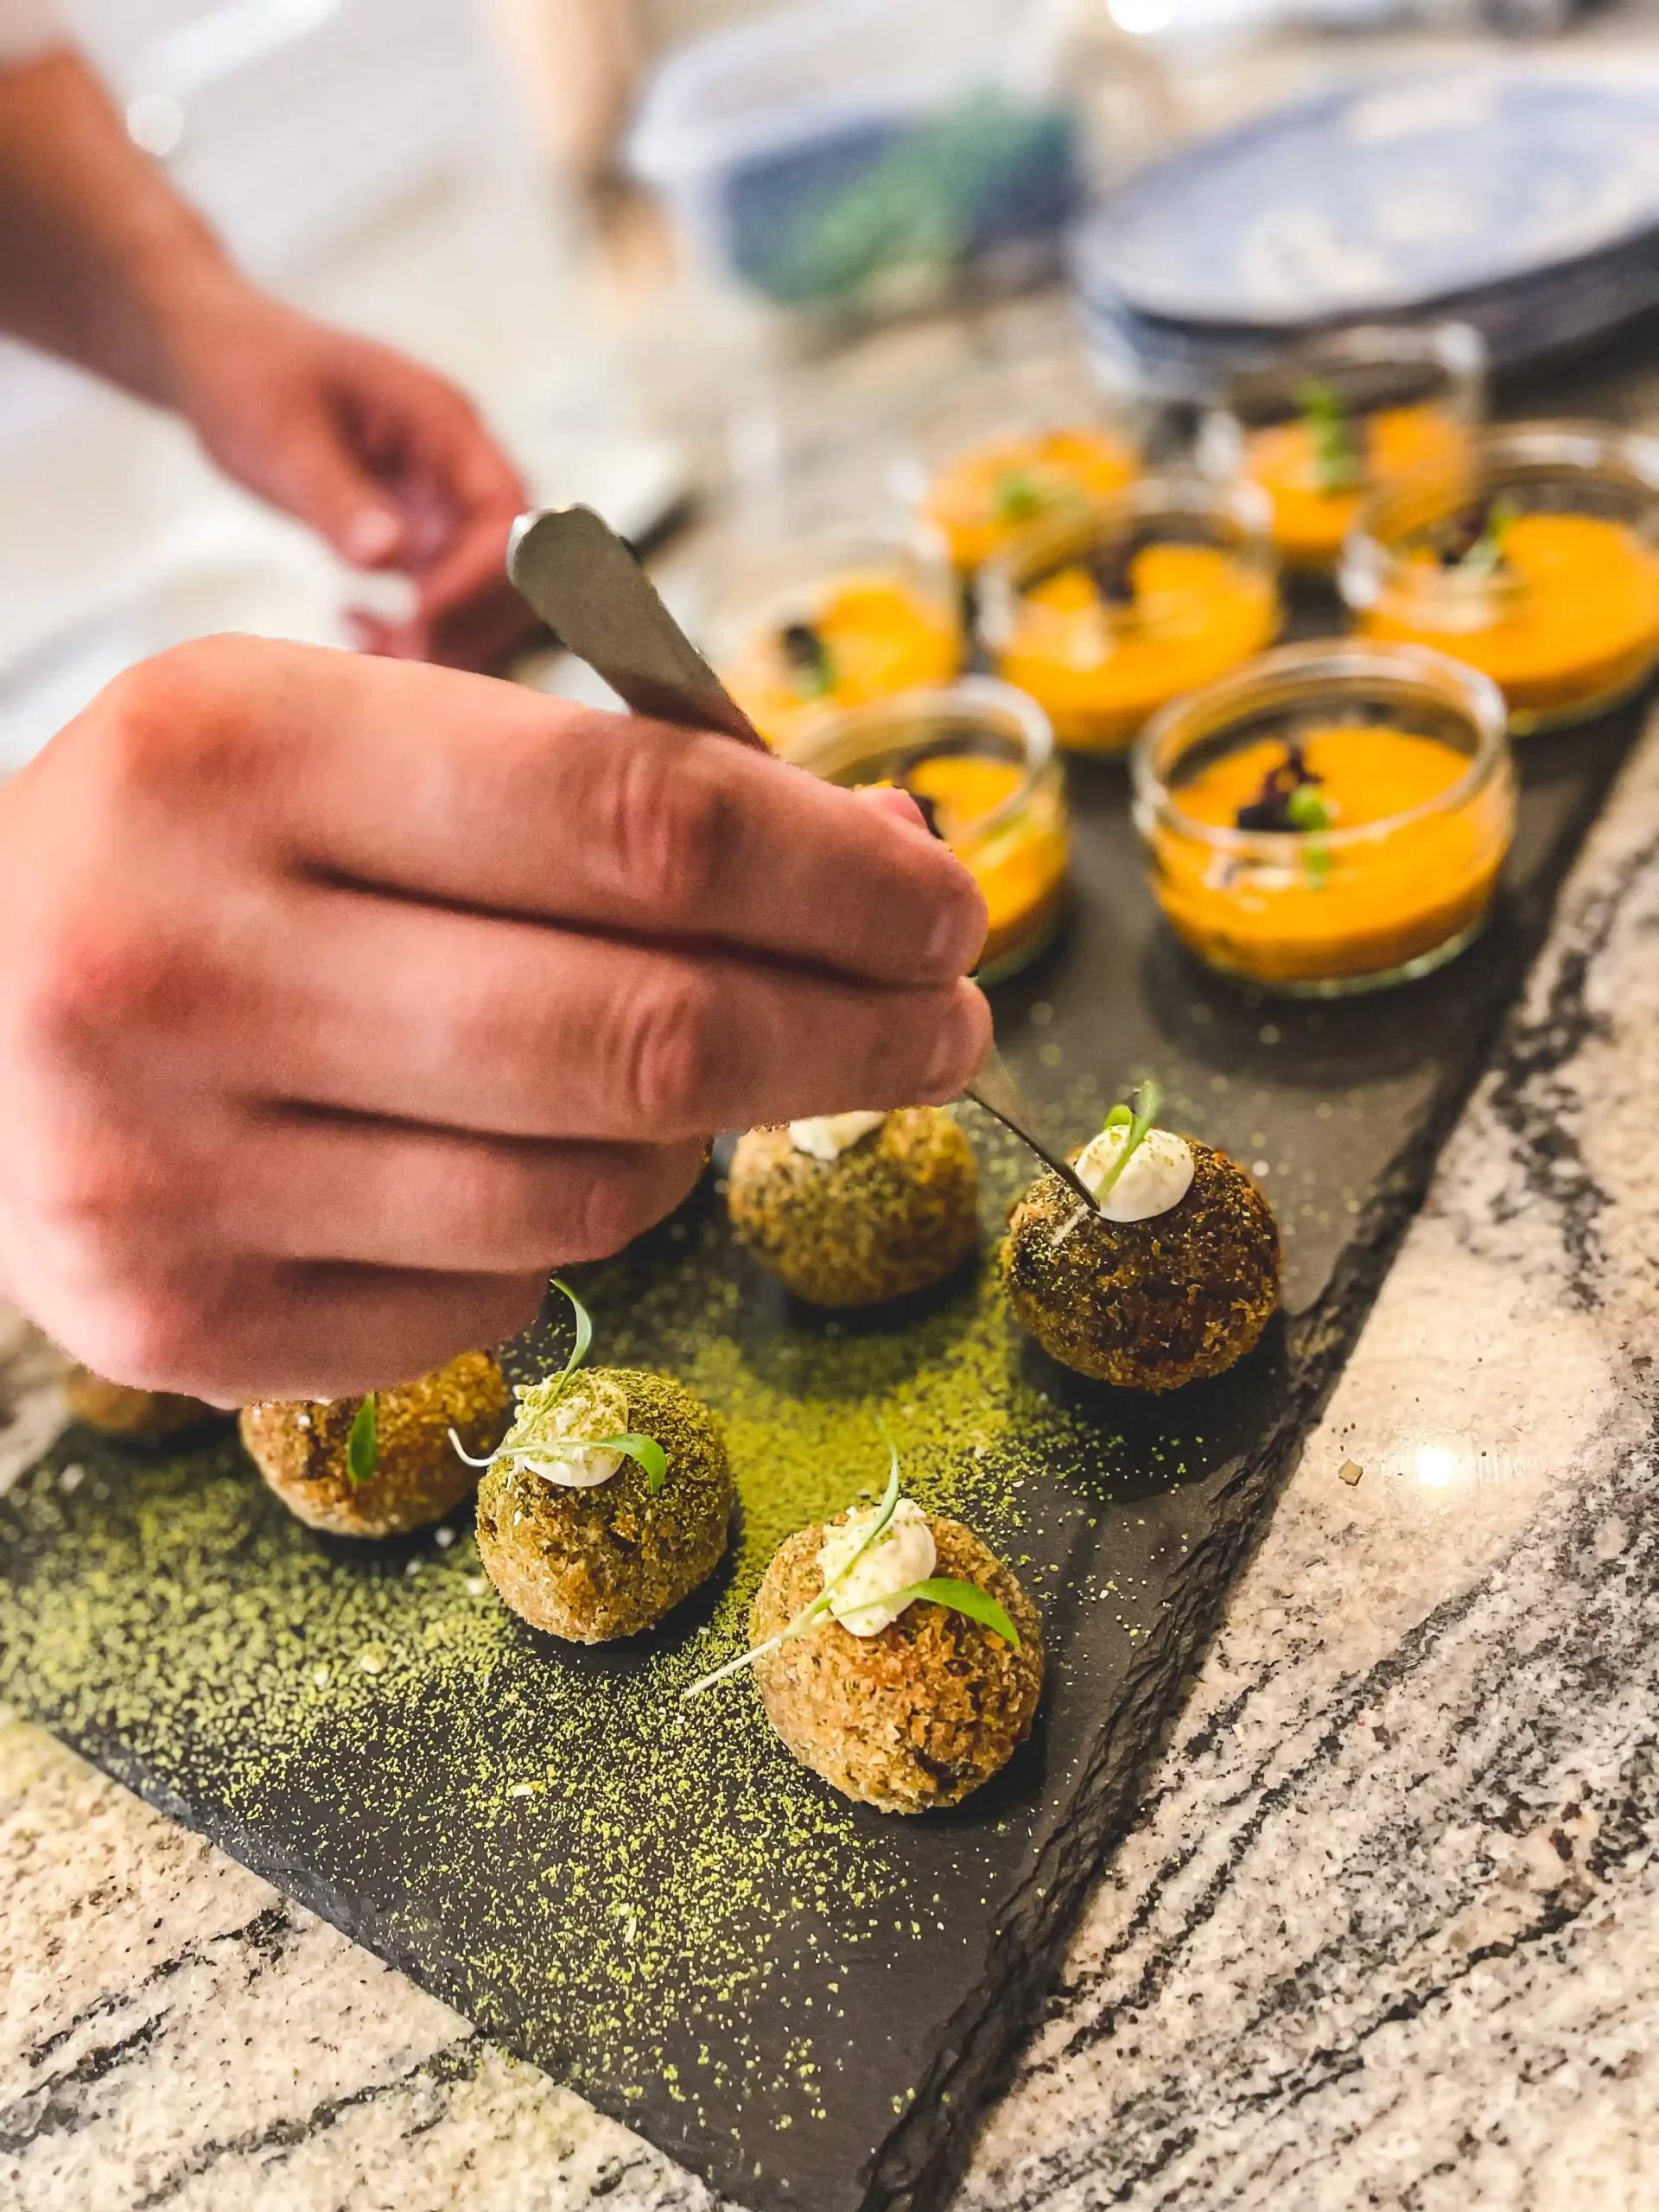 A private chef delicately assembling some canapés